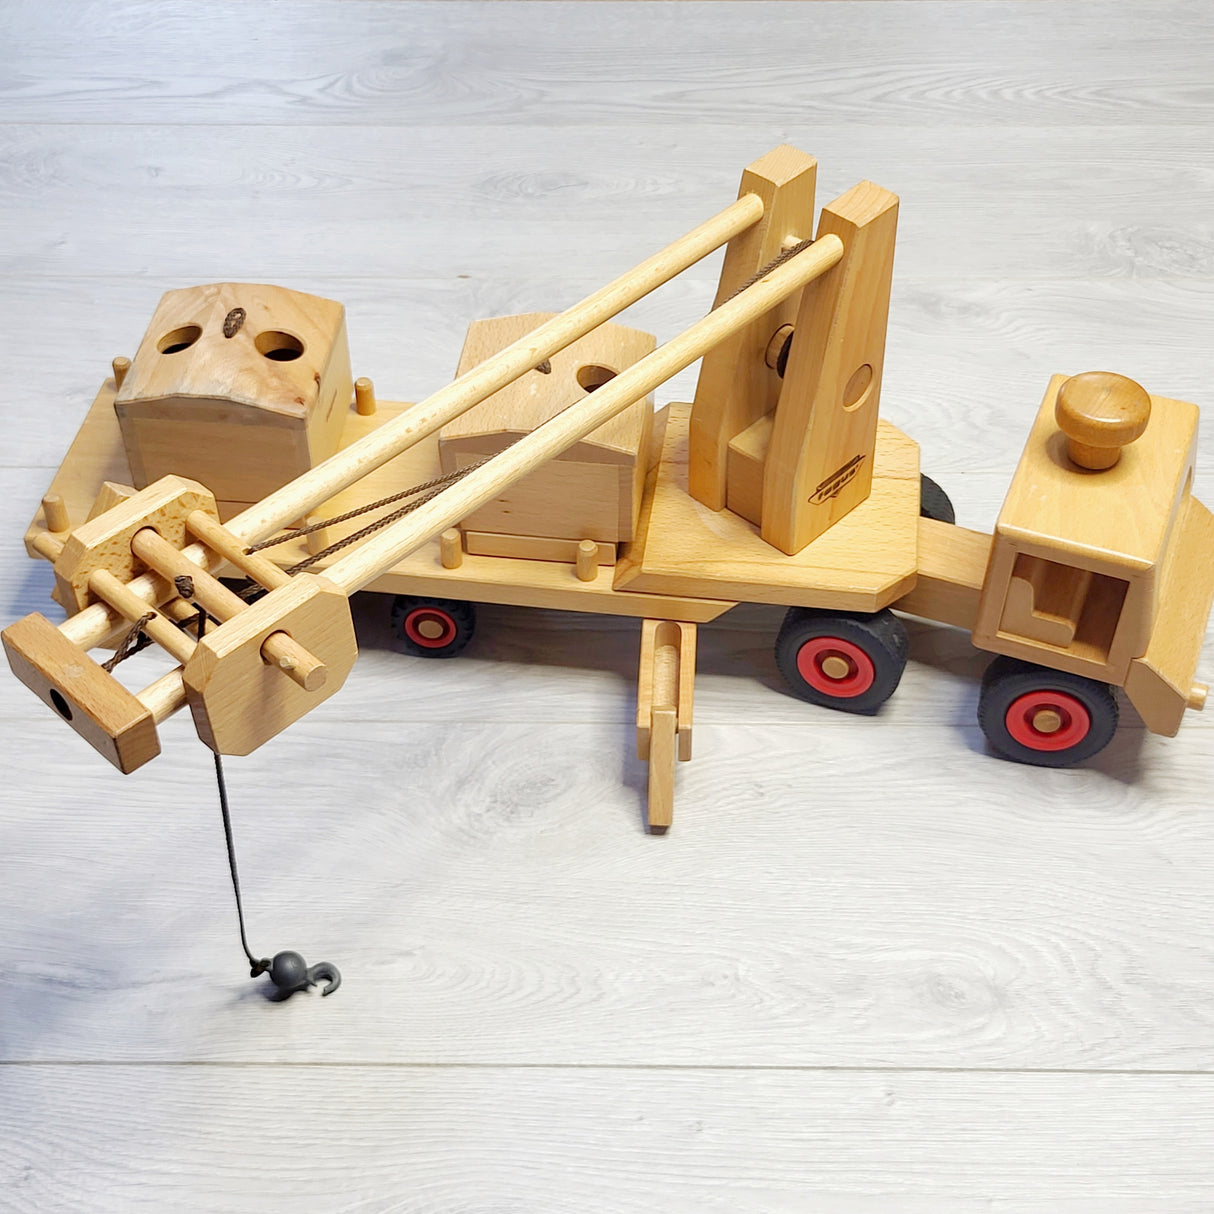 JHTC3 - Fagus wooden crane truck - local pick up or delivery only. Retails for $350 new